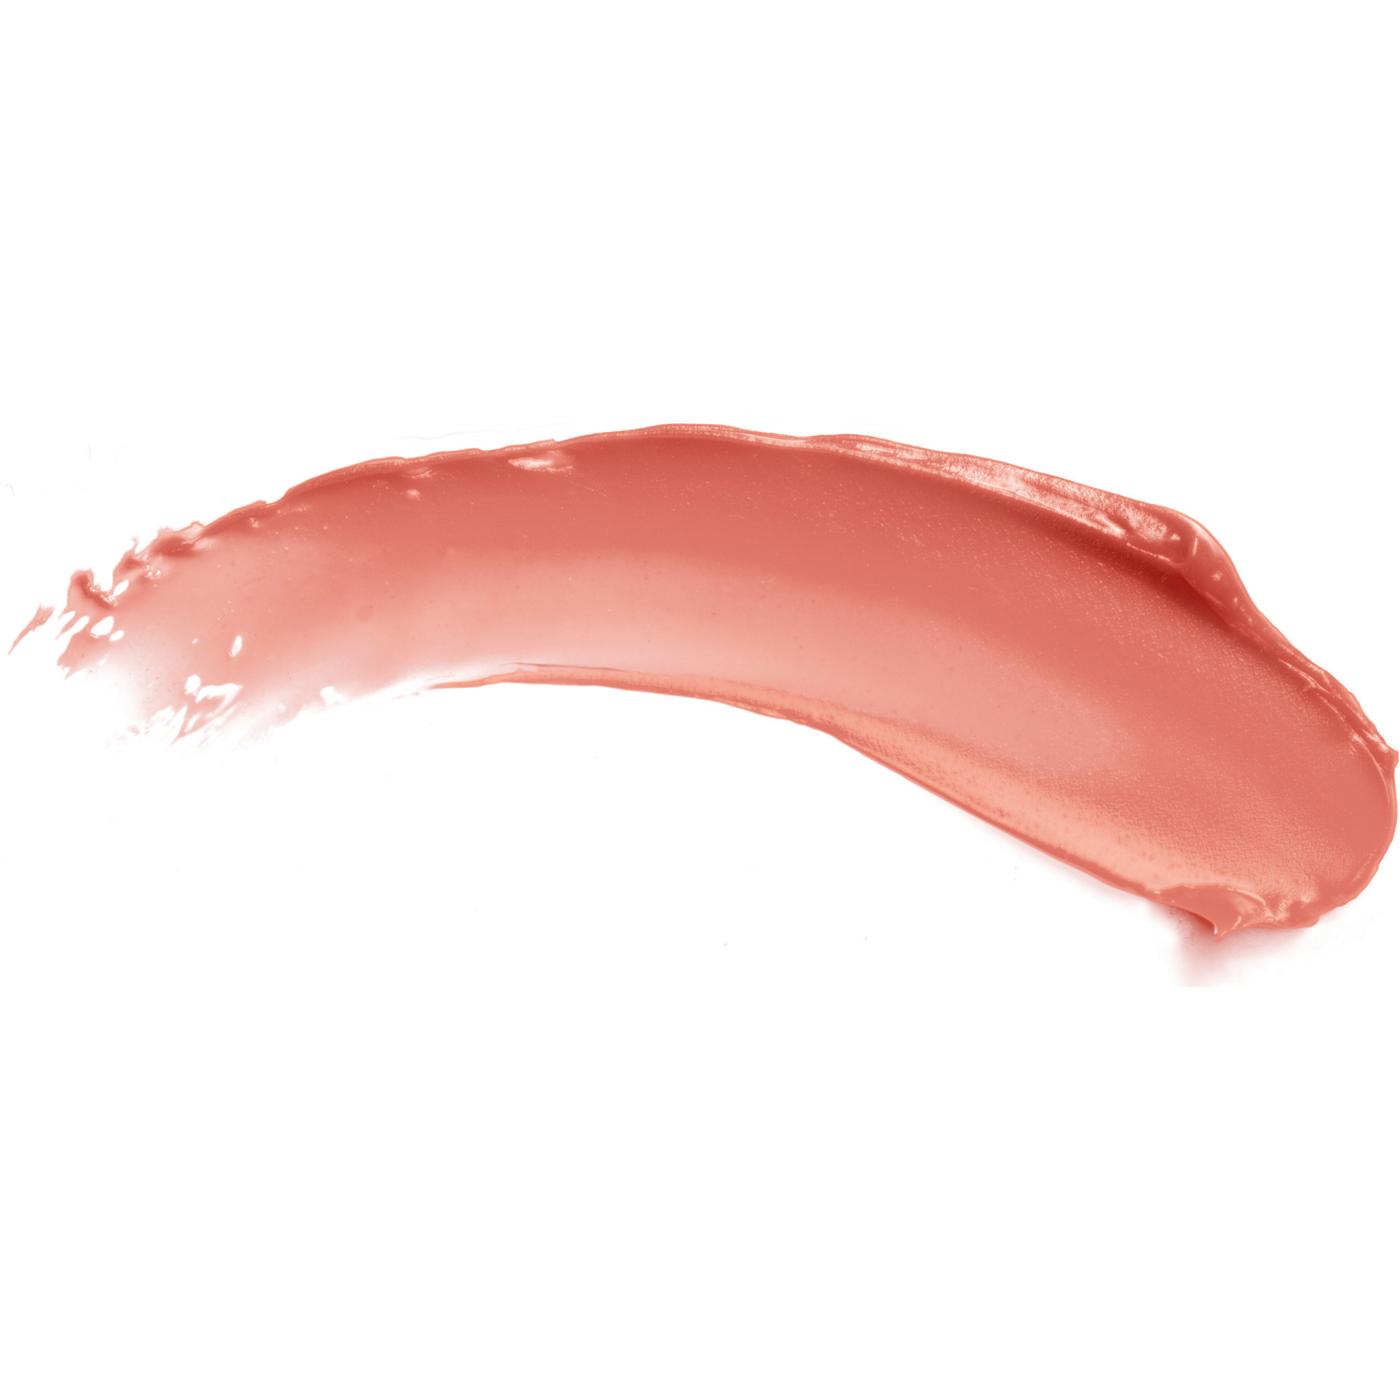 Burt's Bees Squeezy Tinted Lip Balm - Sweet Peach; image 2 of 12